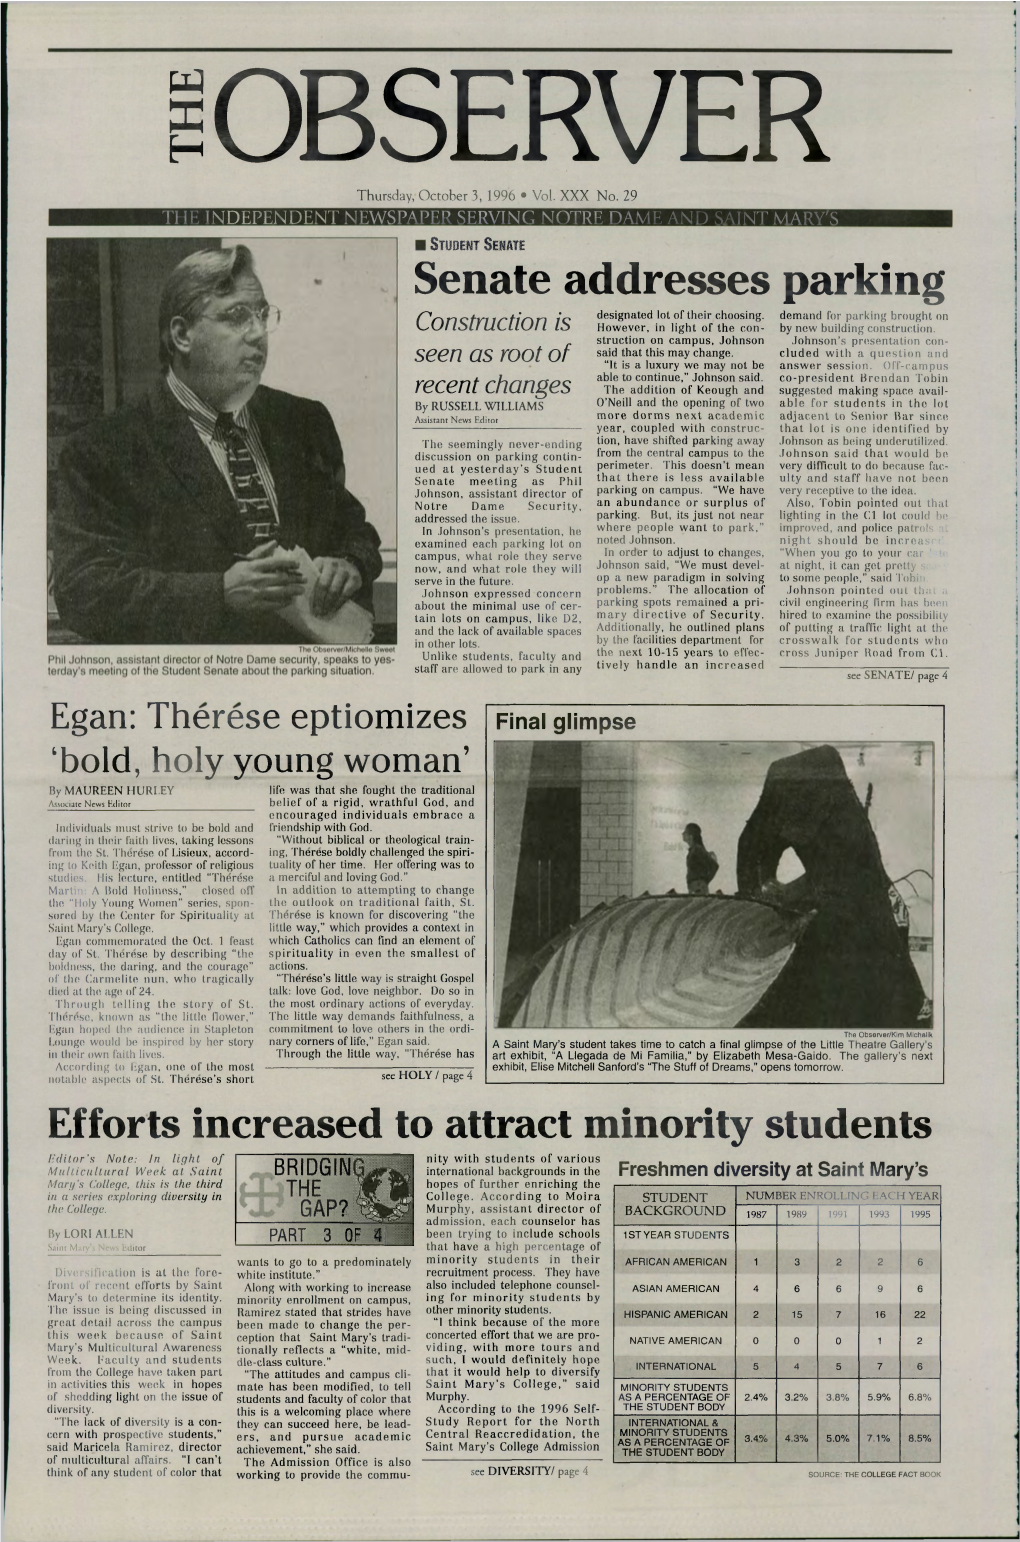 Senate Addresses Parking Efforts Increased to Attract Minority Students